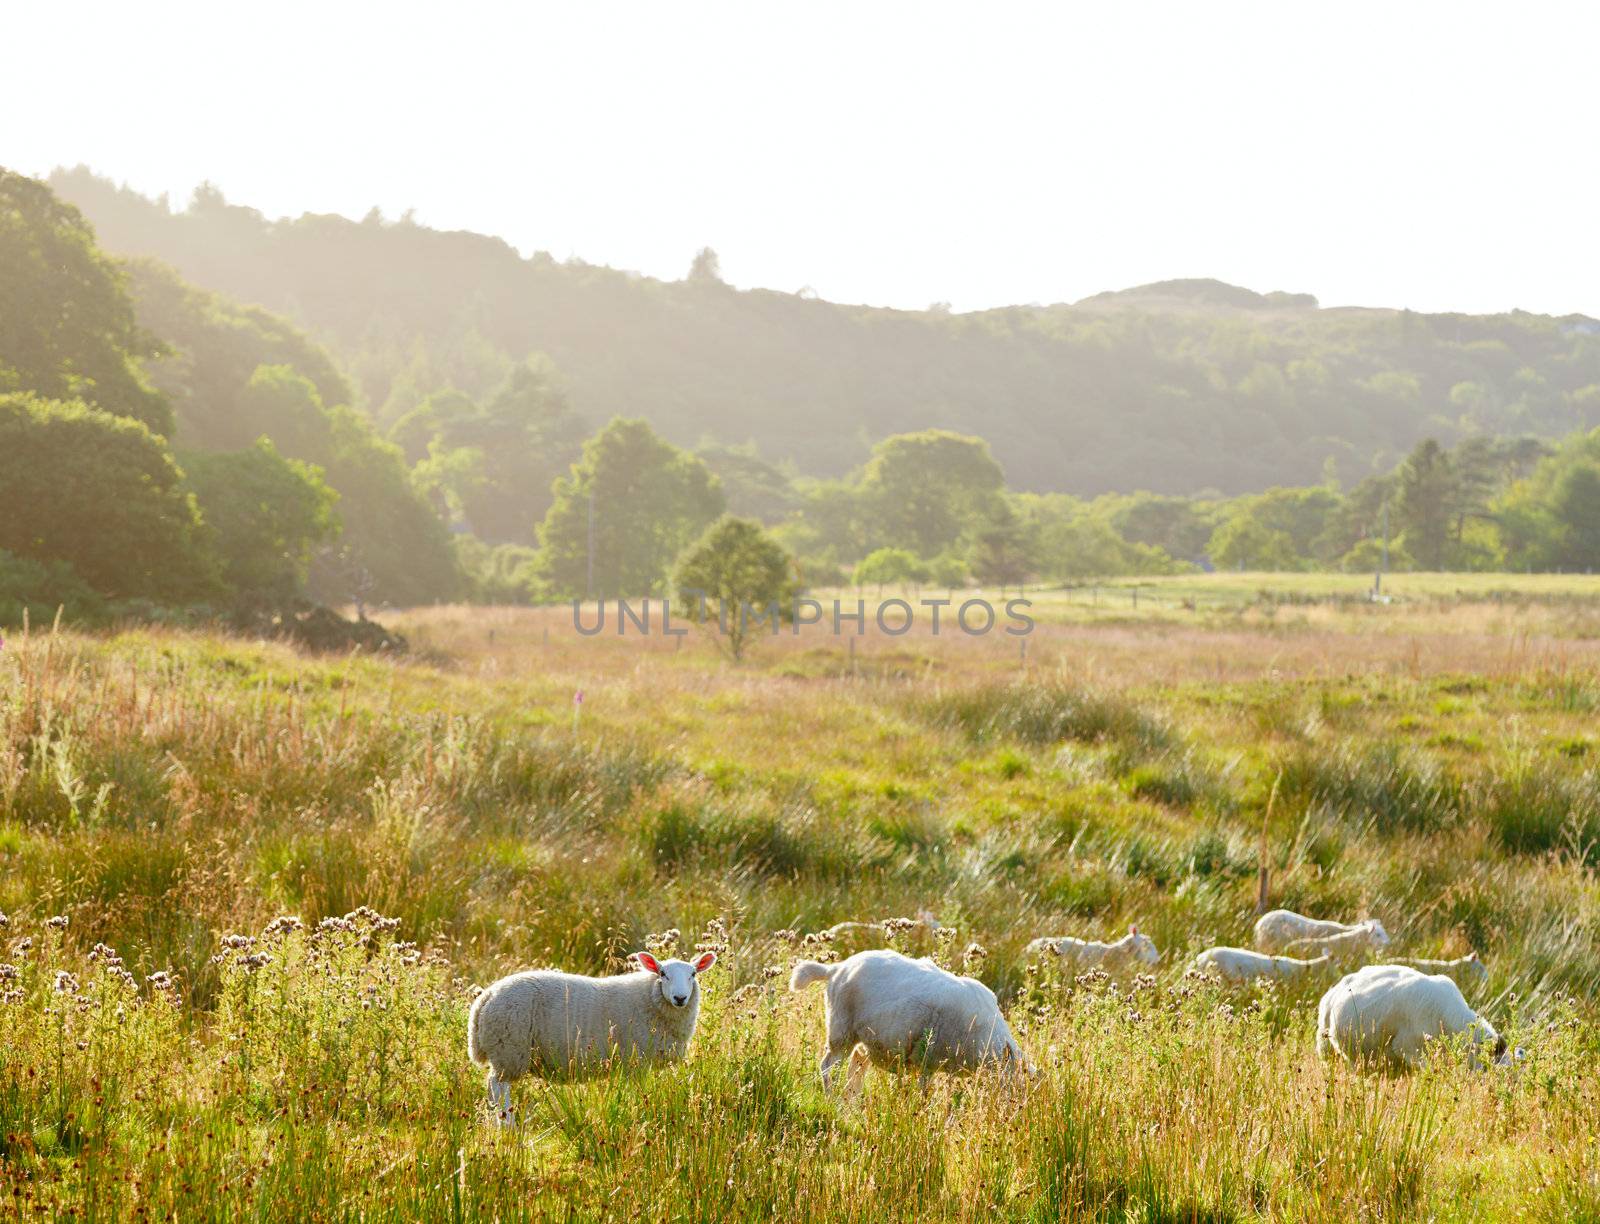 Sheeps at a pasture in Scotland